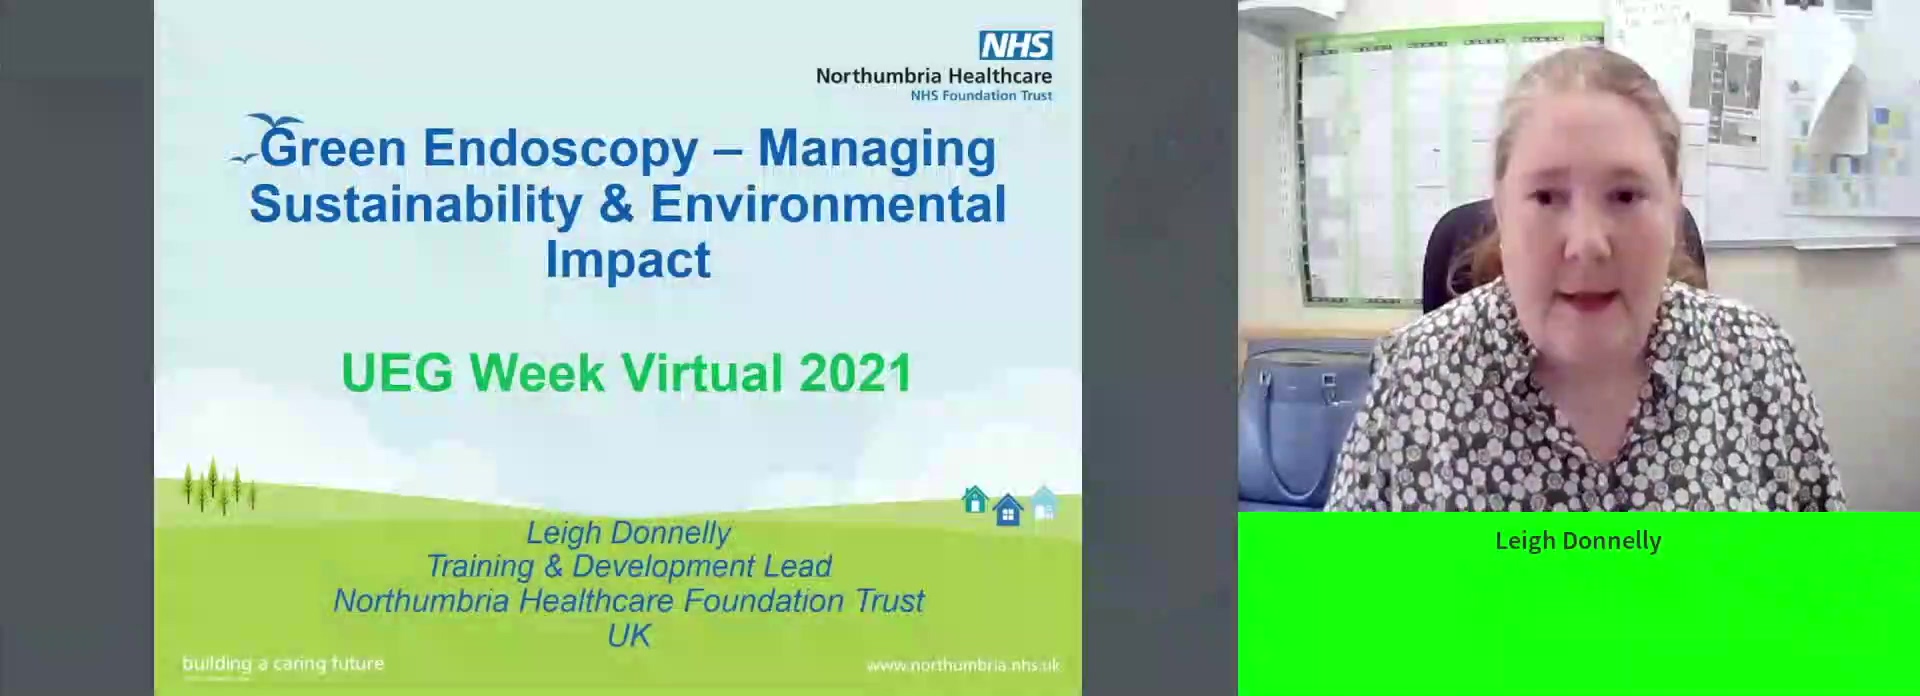 Green endoscopy: Managing sustainibility and environmental impact